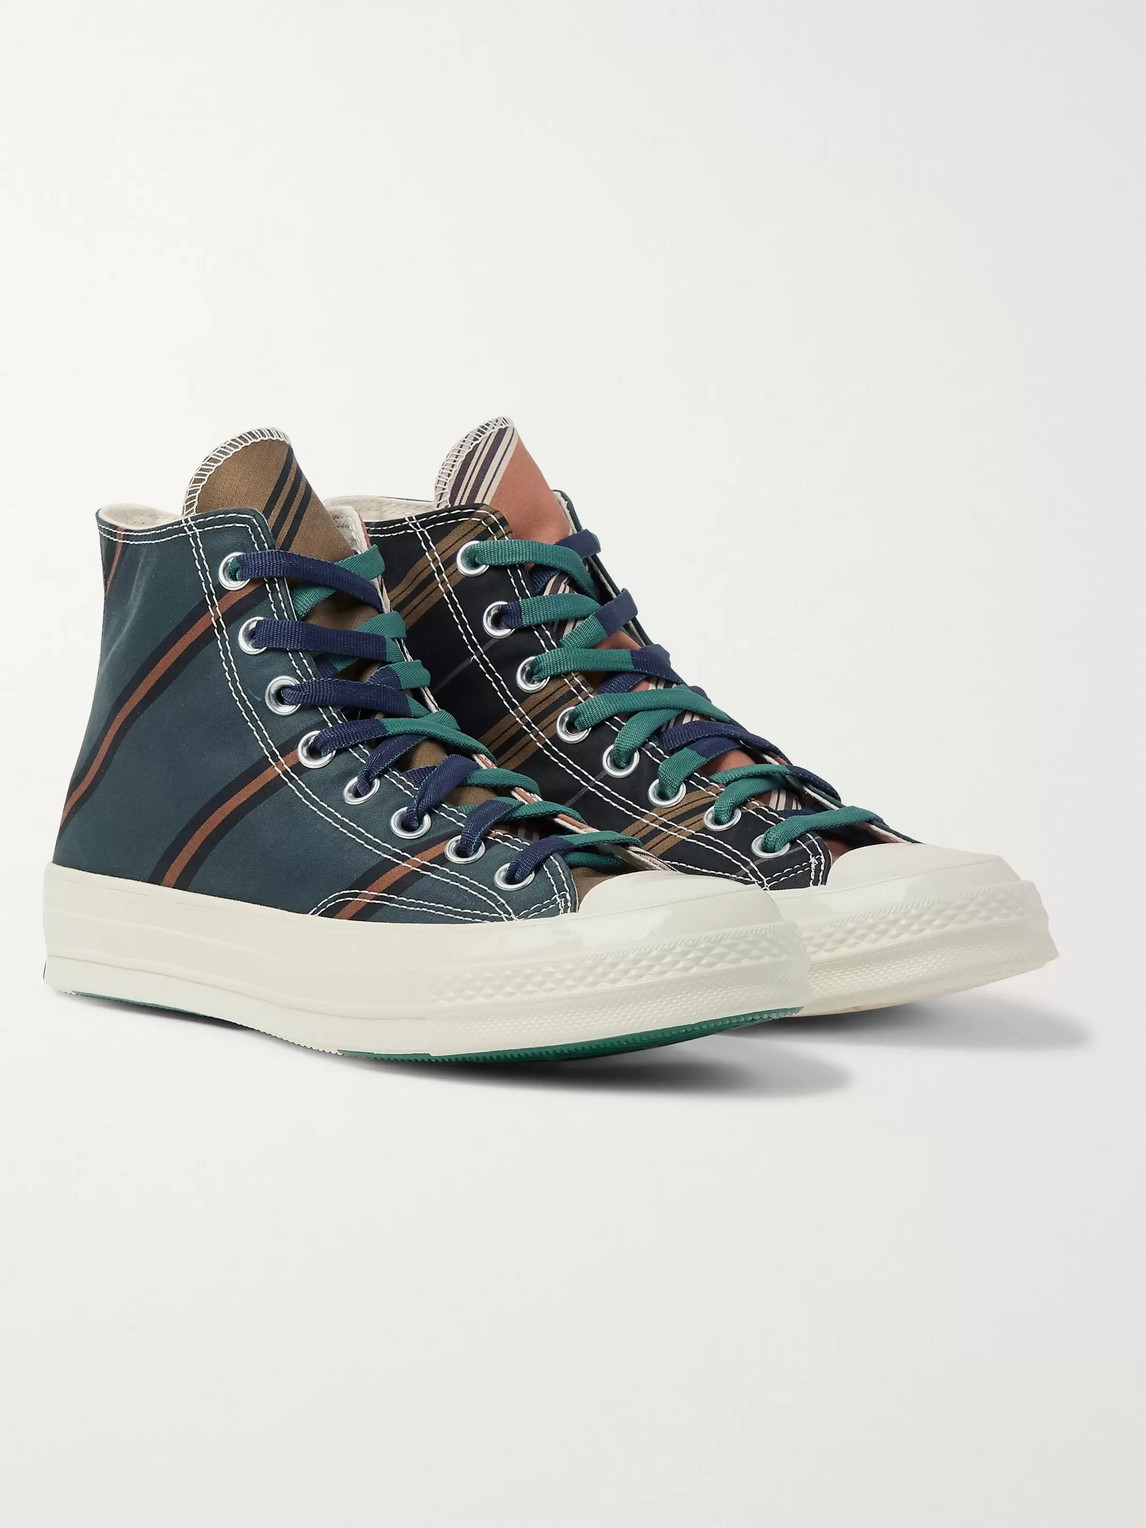 CONVERSE CHUCK 70 STRIPED CANVAS HIGH-TOP SNEAKERS